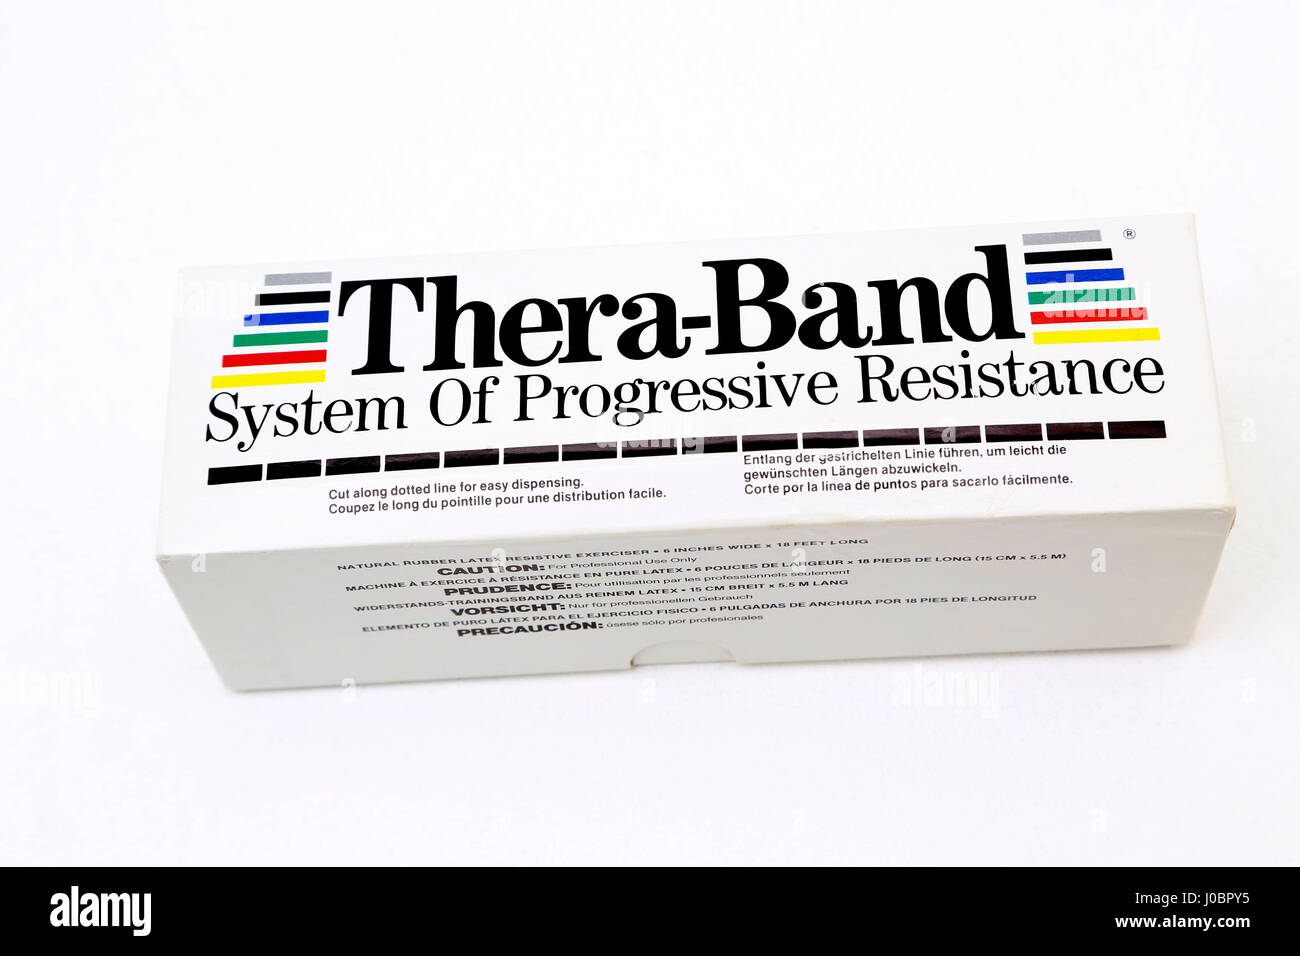 Thera-Band system of progressive resistance used for exercising Stock Photo